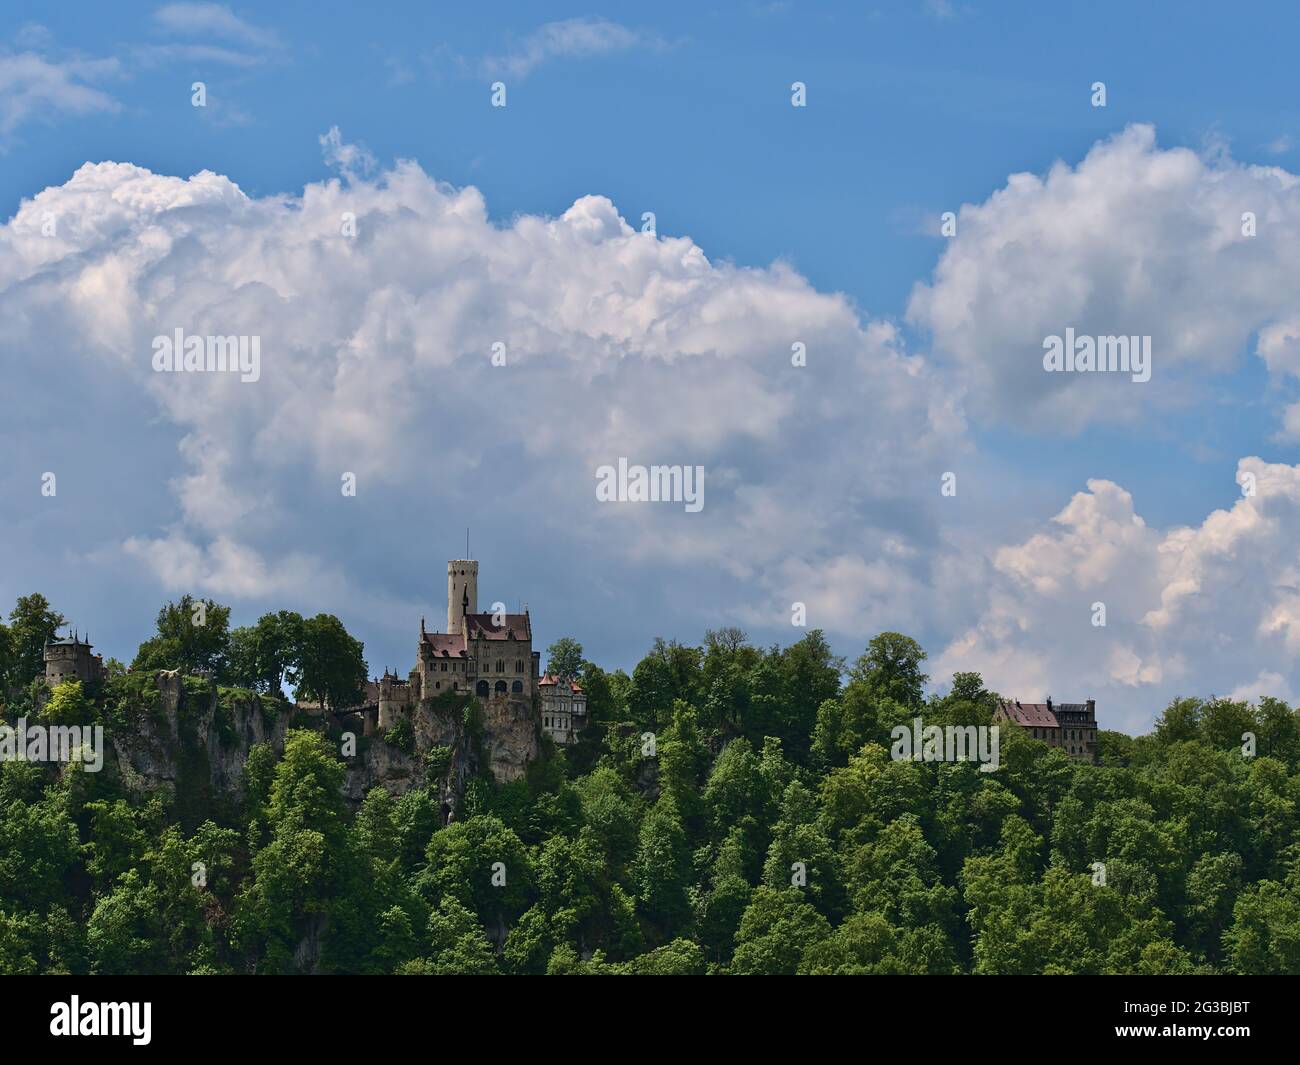 Stunning view of famous Lichtenstein castle located on rock on the edge ('Albtrauf') of Swabian Alb, Baden-Württemberg, Germany with green forest. Stock Photo